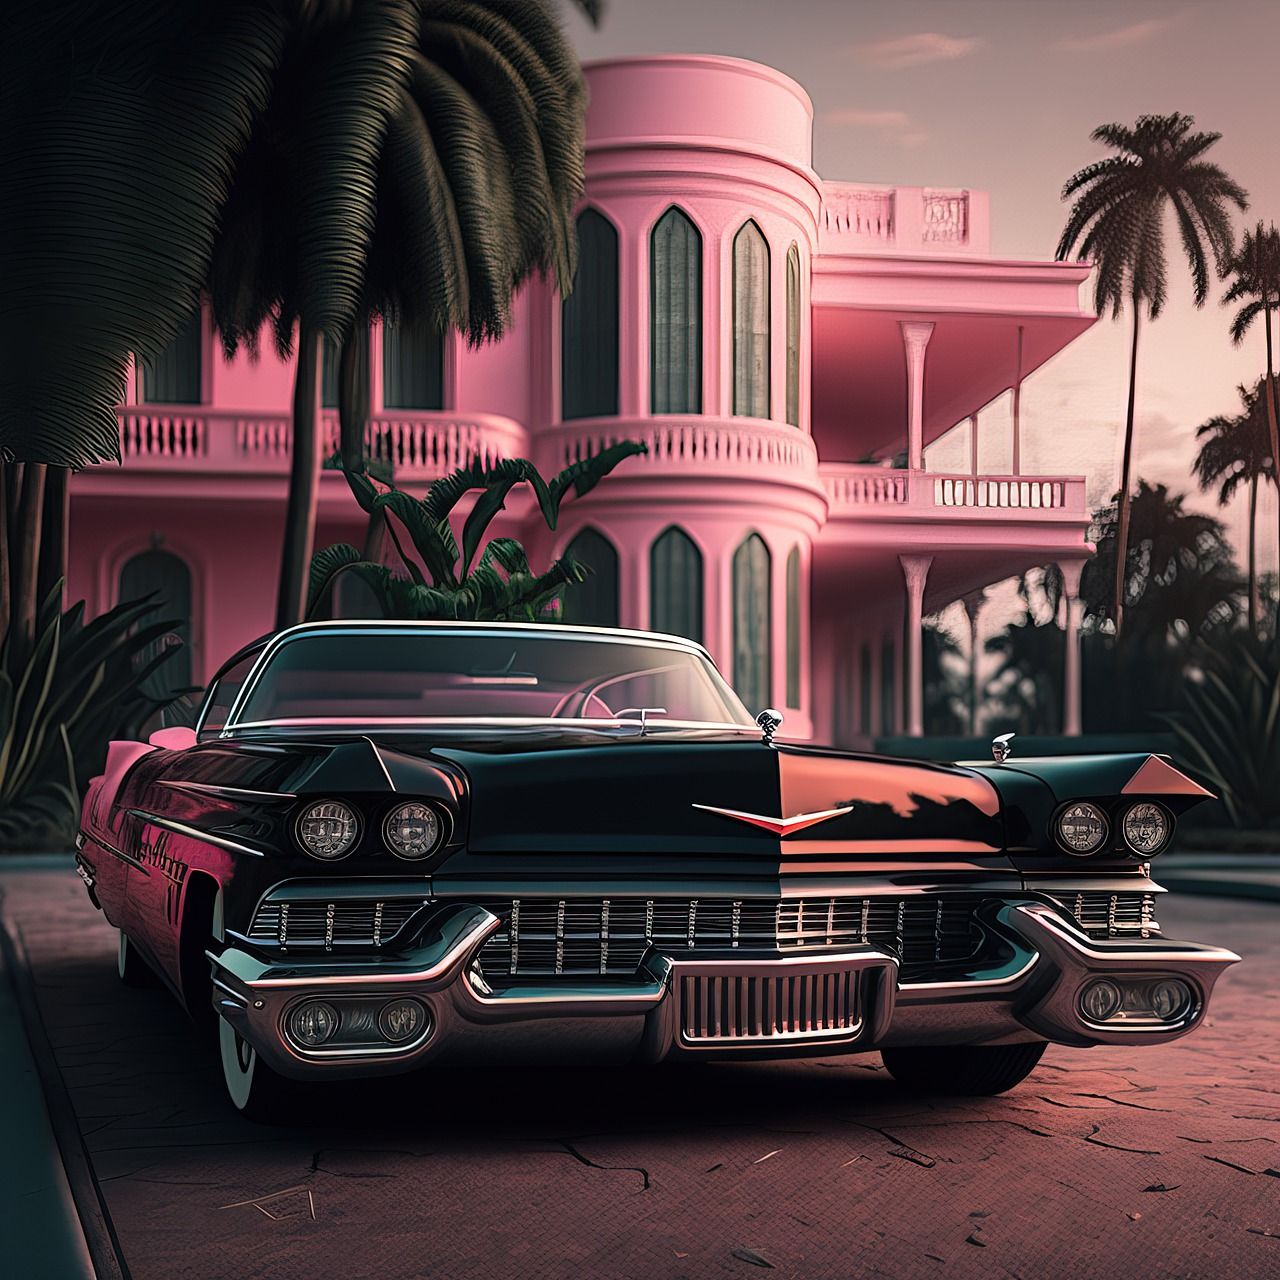 A car parked in front of an old pink house - 50s